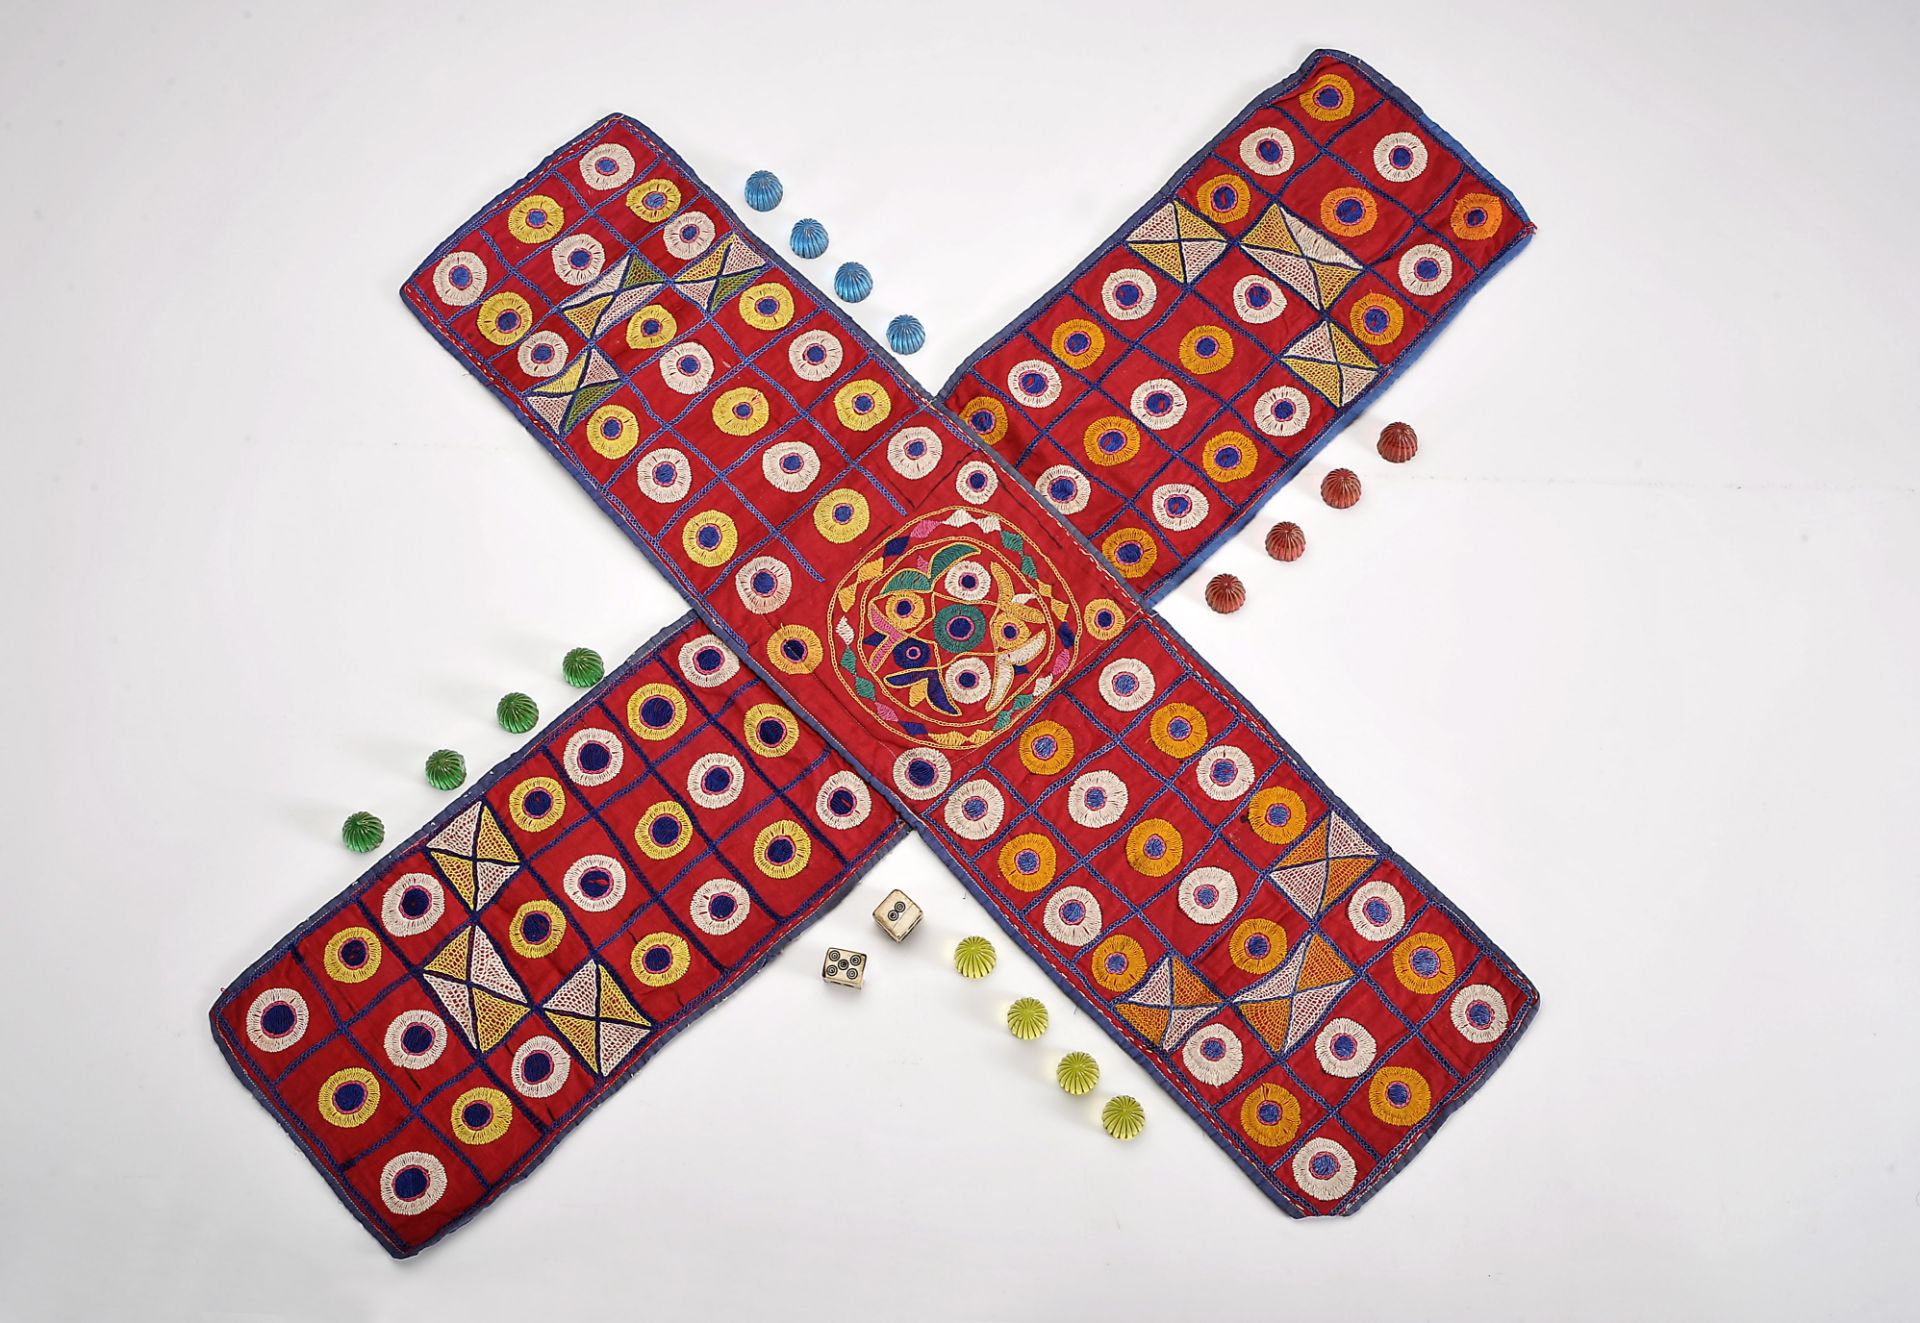 Pachisi pieces, dice and board - Image 3 of 8